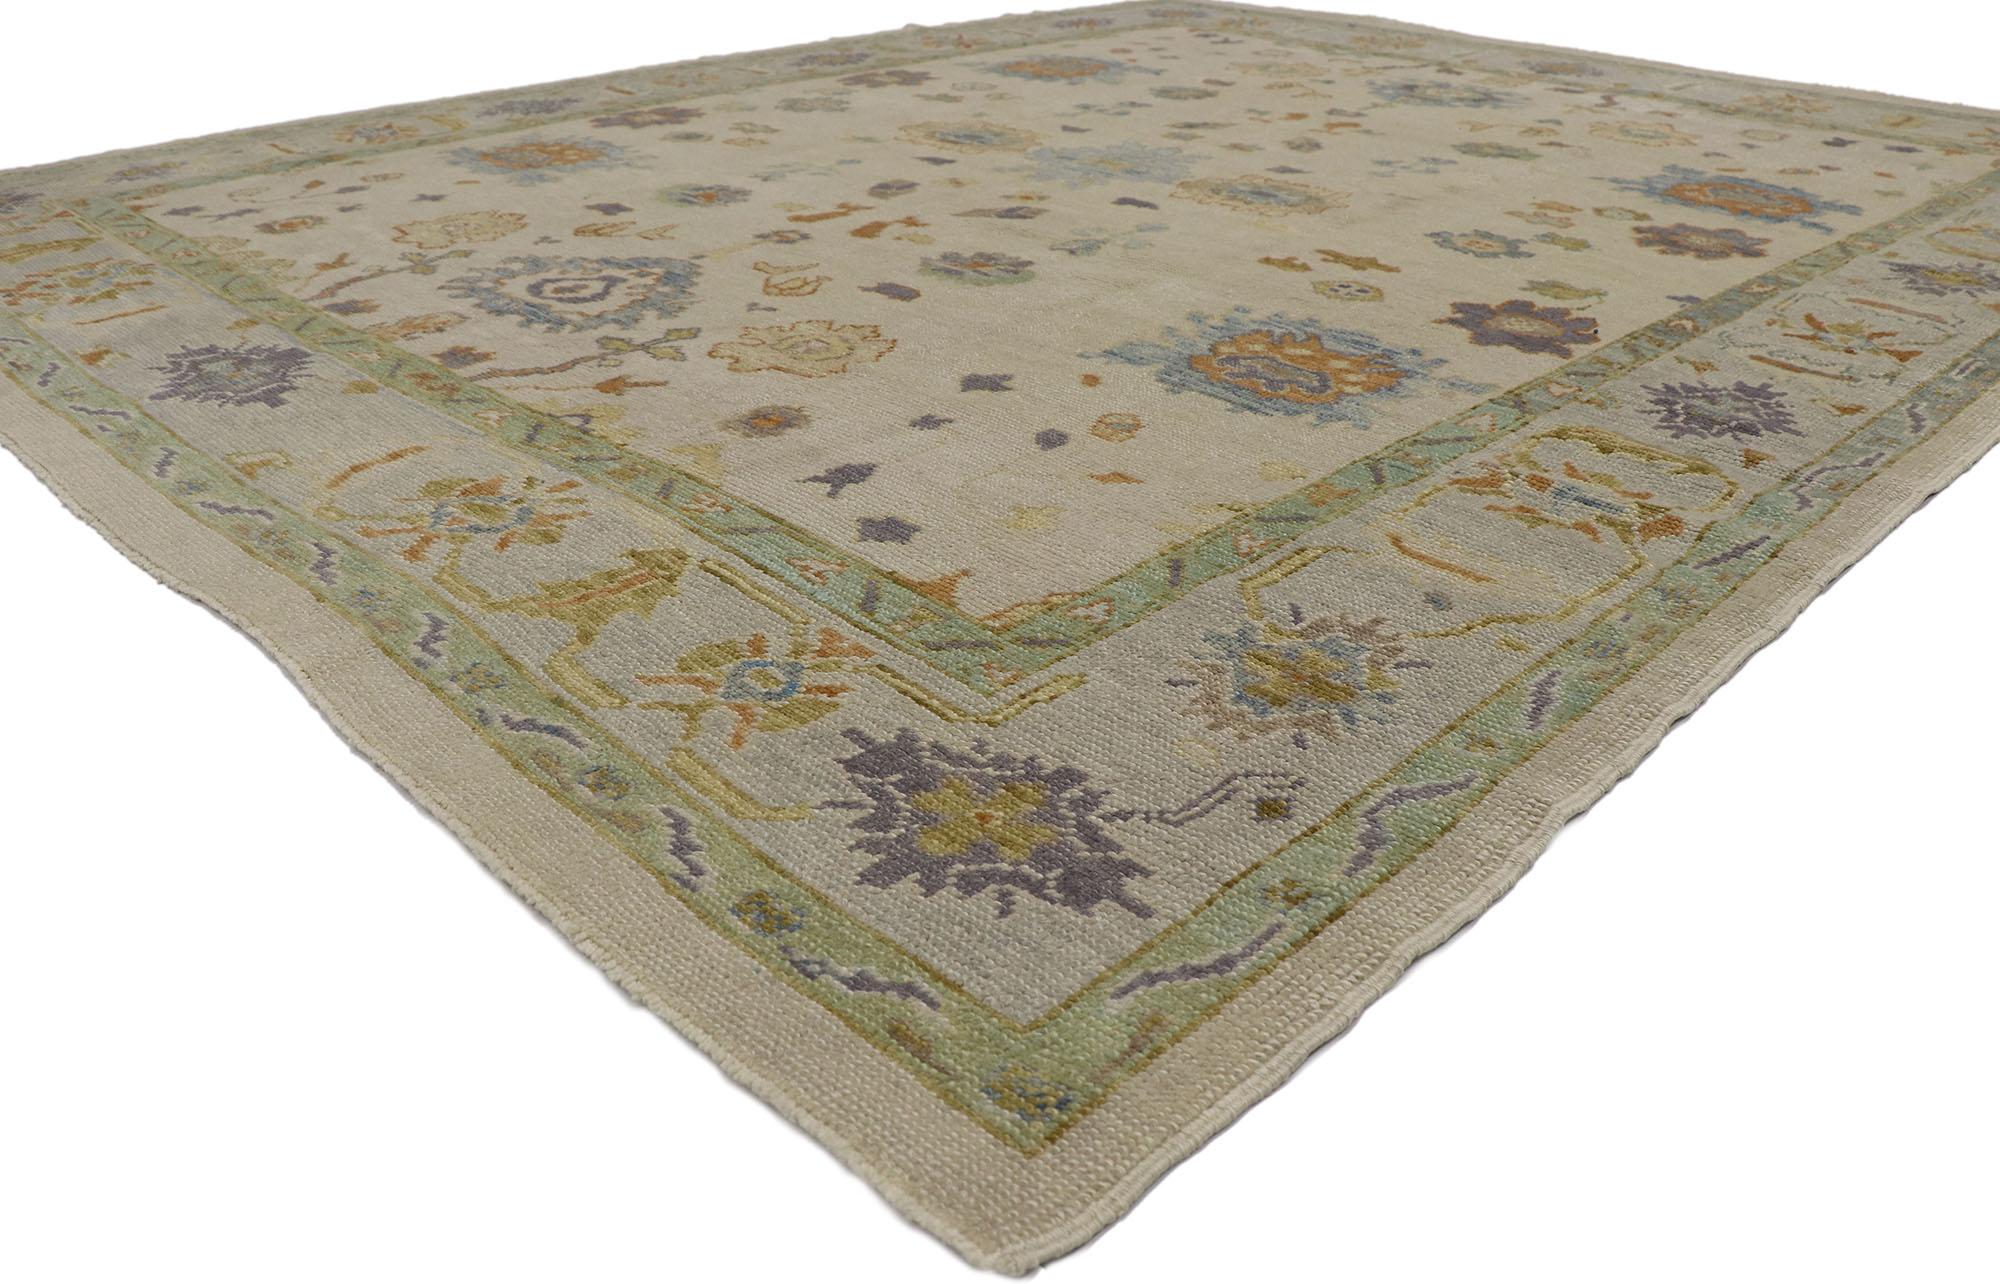 53611 New Contemporary Turkish Oushak Rug with Modern Style 09'02 x 11'01. Blending elements from the modern world with a soft color palette, this hand-knotted wool contemporary Turkish Oushak rug is poised to impress. The geometric print and earthy